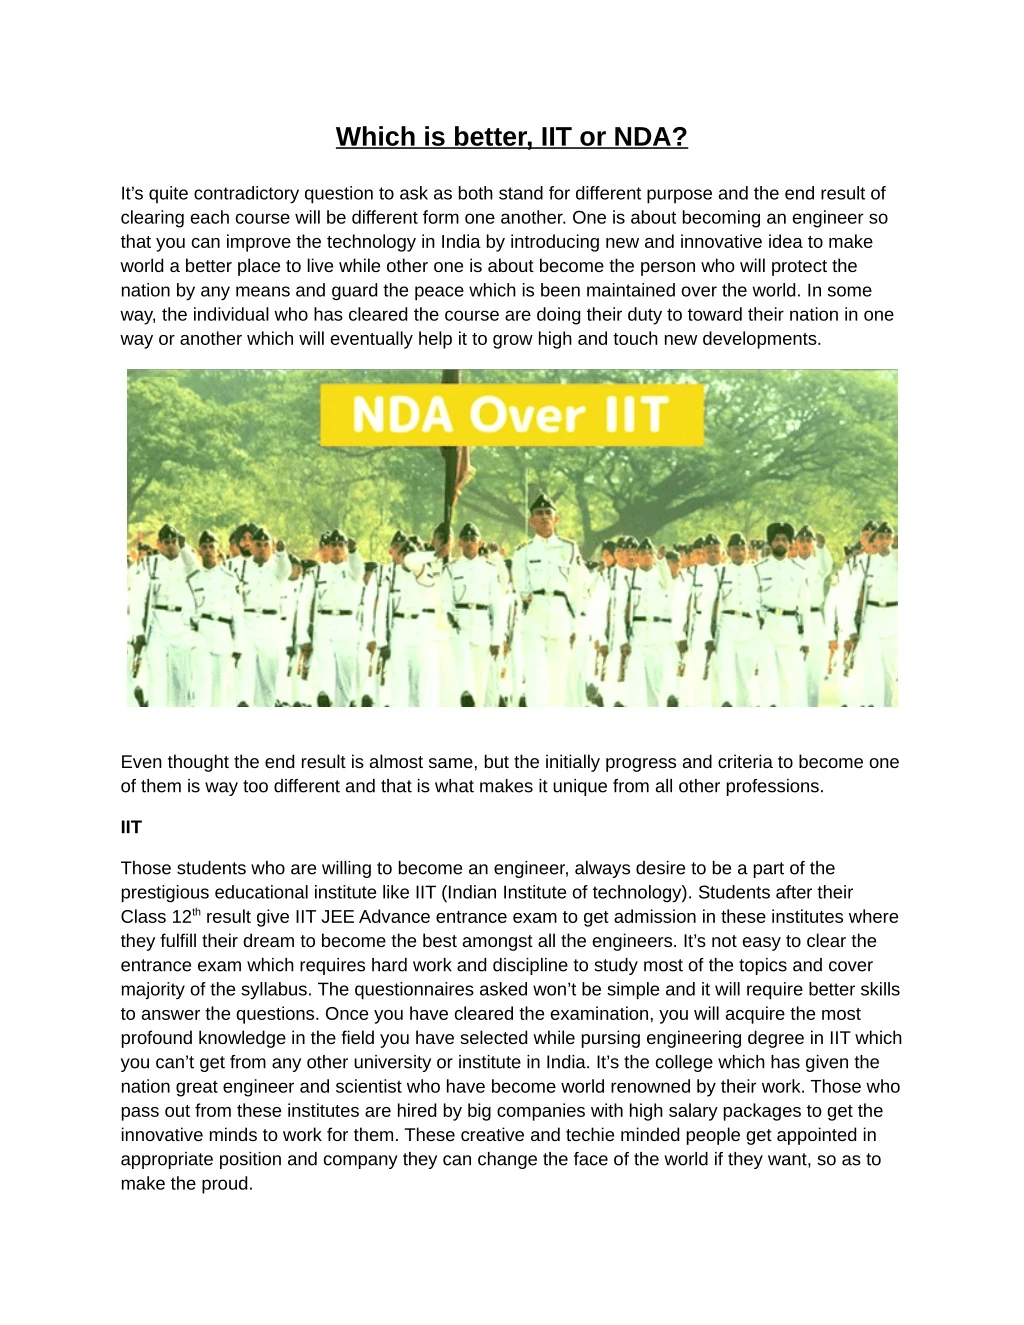 which is better iit or nda